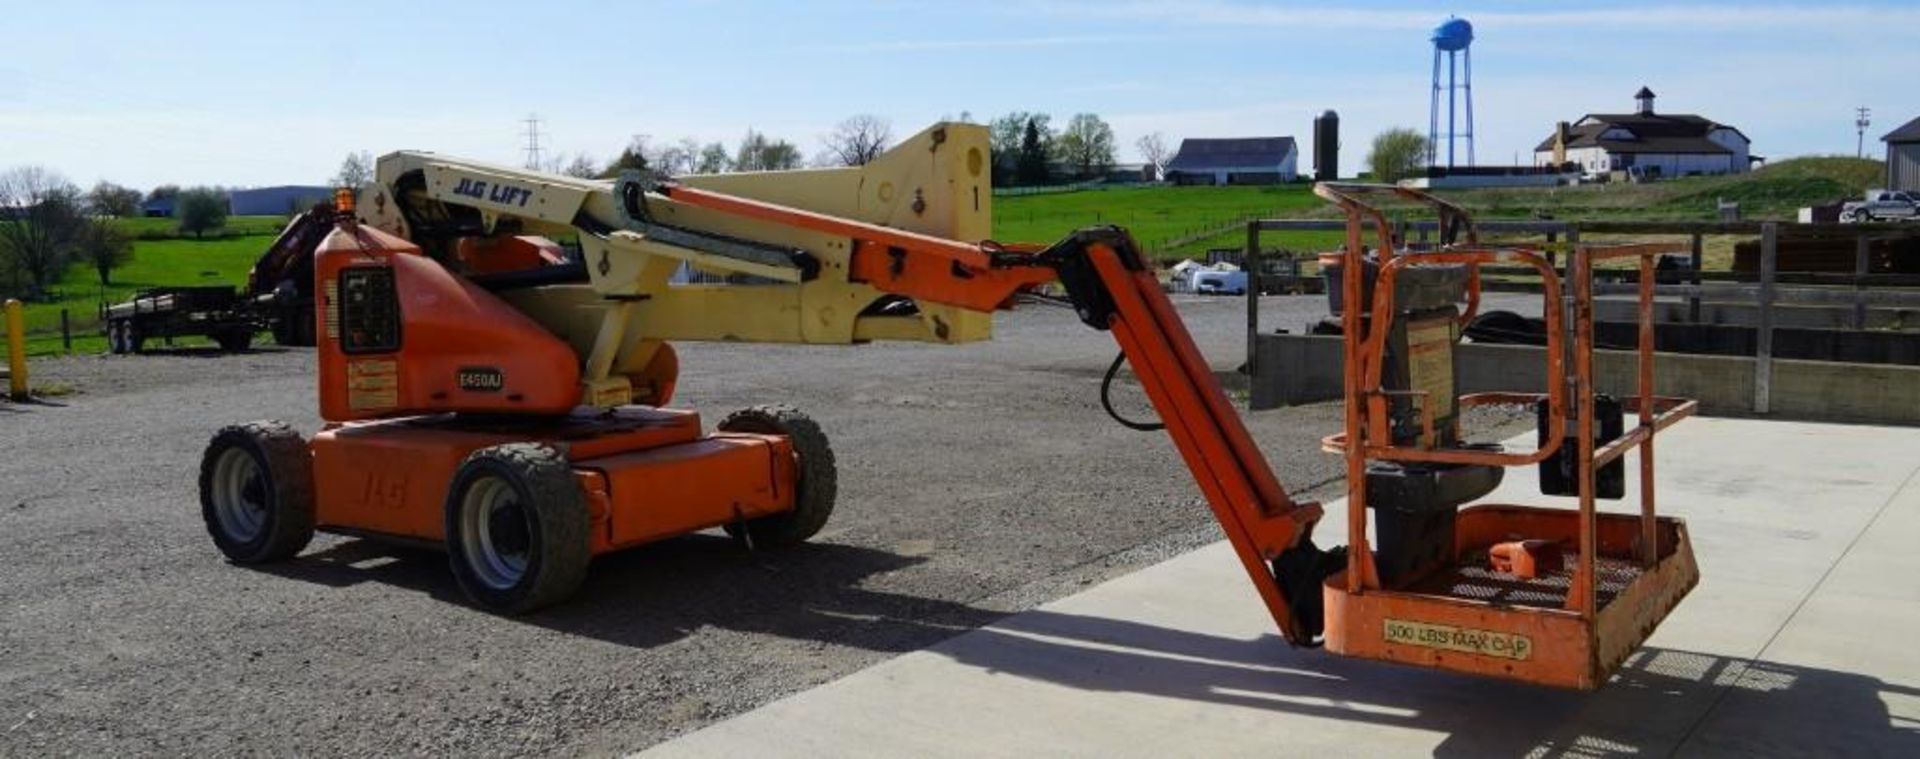 2006 JLG Electric Manlift - Image 7 of 30